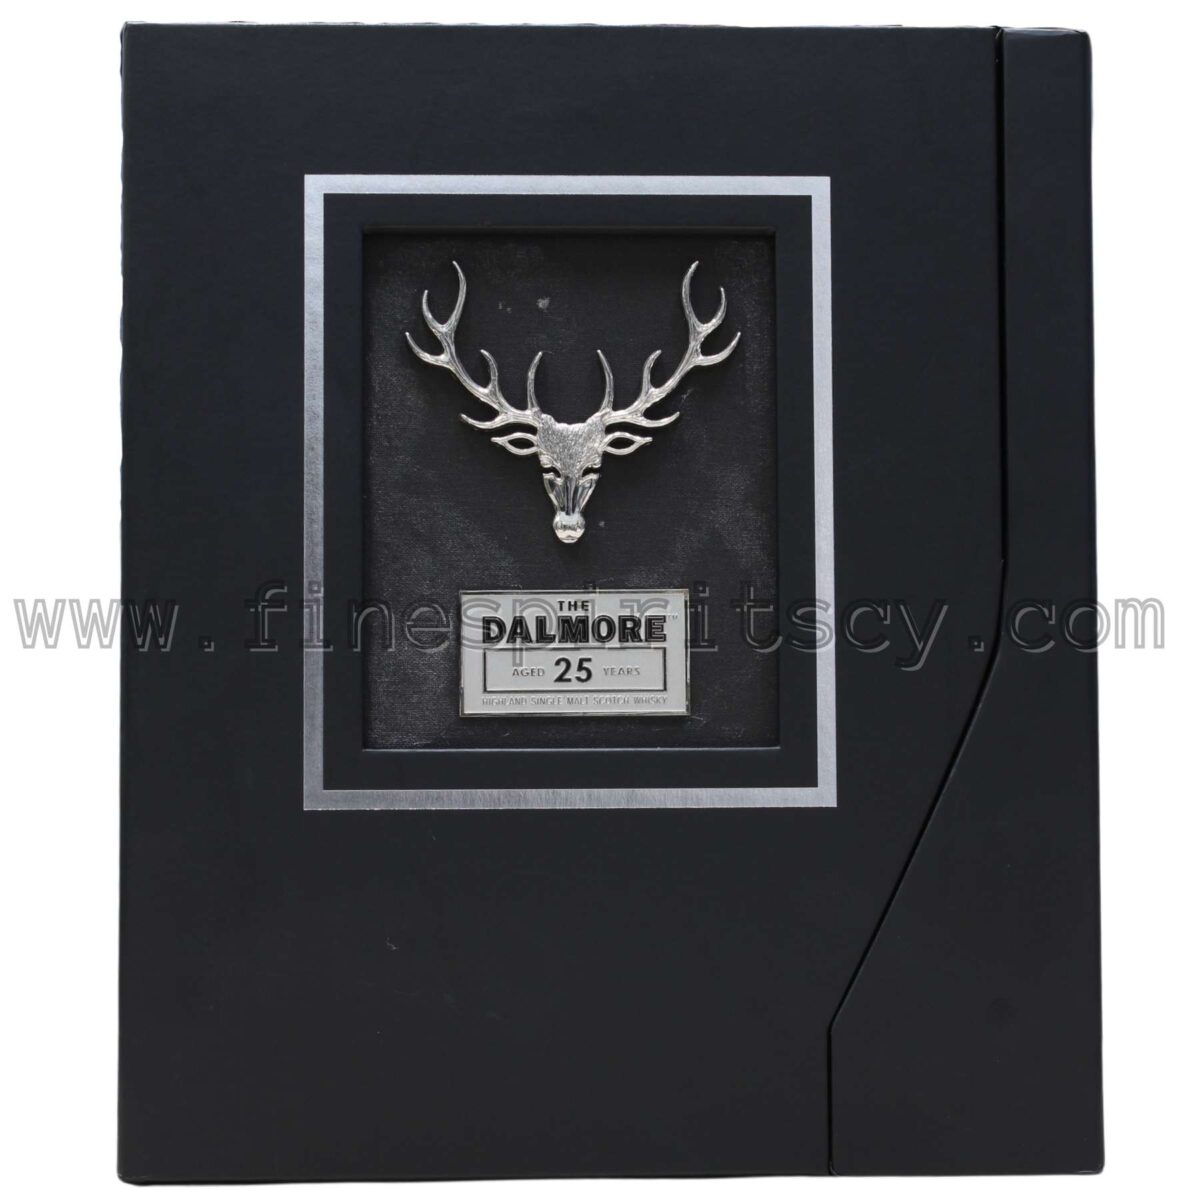 Dalmore Twenty Five Year Old Box Stag Black Whisky Online Whiskey Order Cyprus